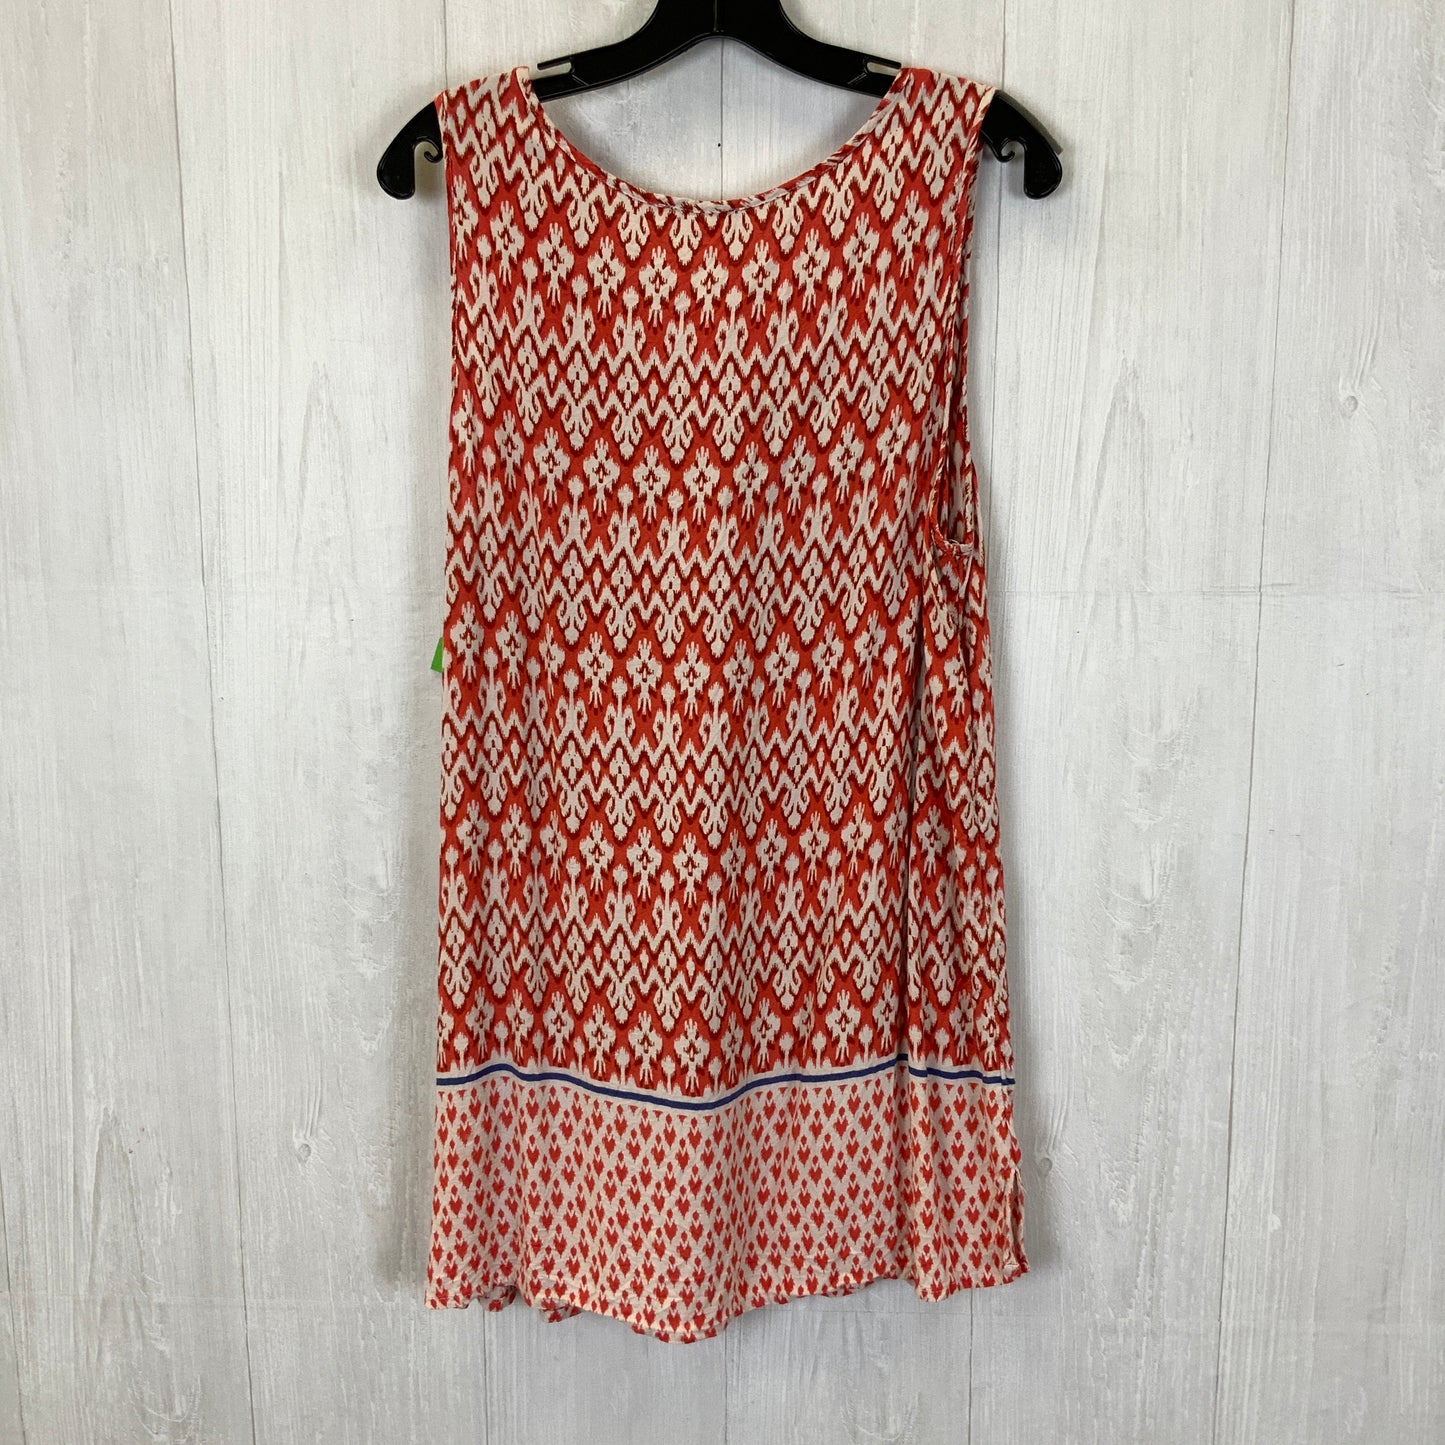 Red & White Top Sleeveless Beachlunchlounge, Size 1x